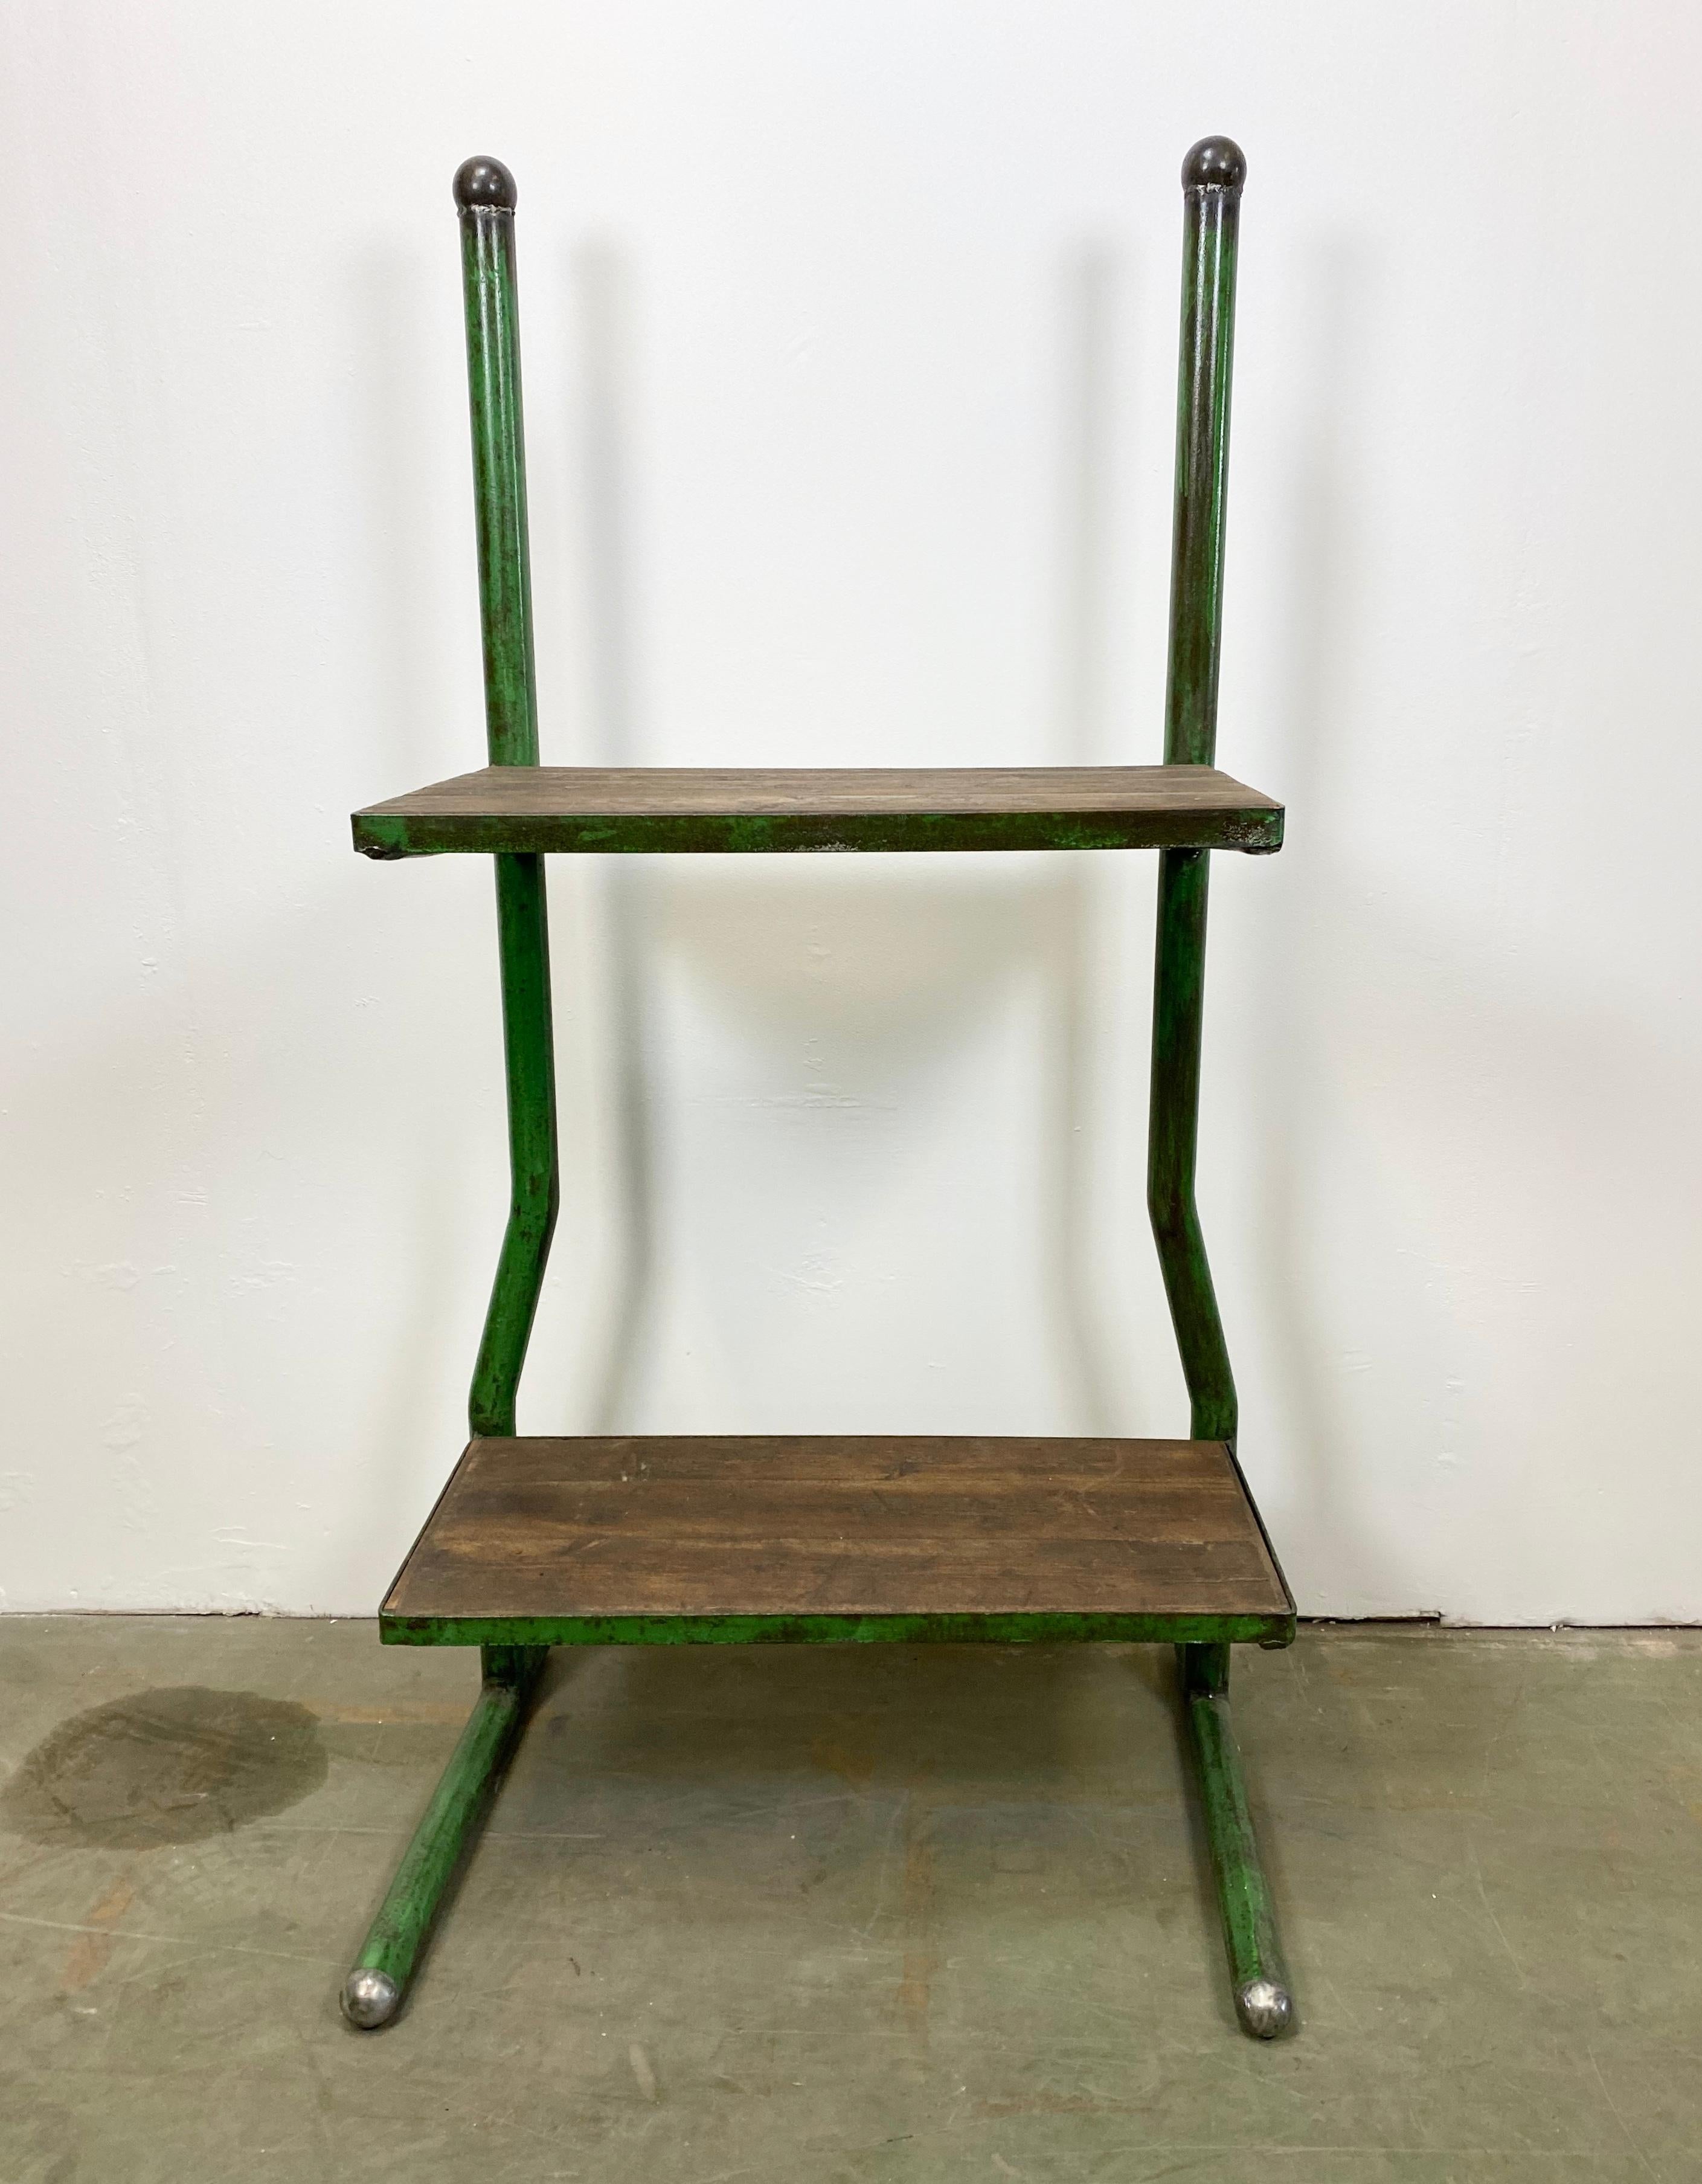 The industrial shelf consists of a green iron structure and two wooden shelves. The weight of the shelf is 30 kg.